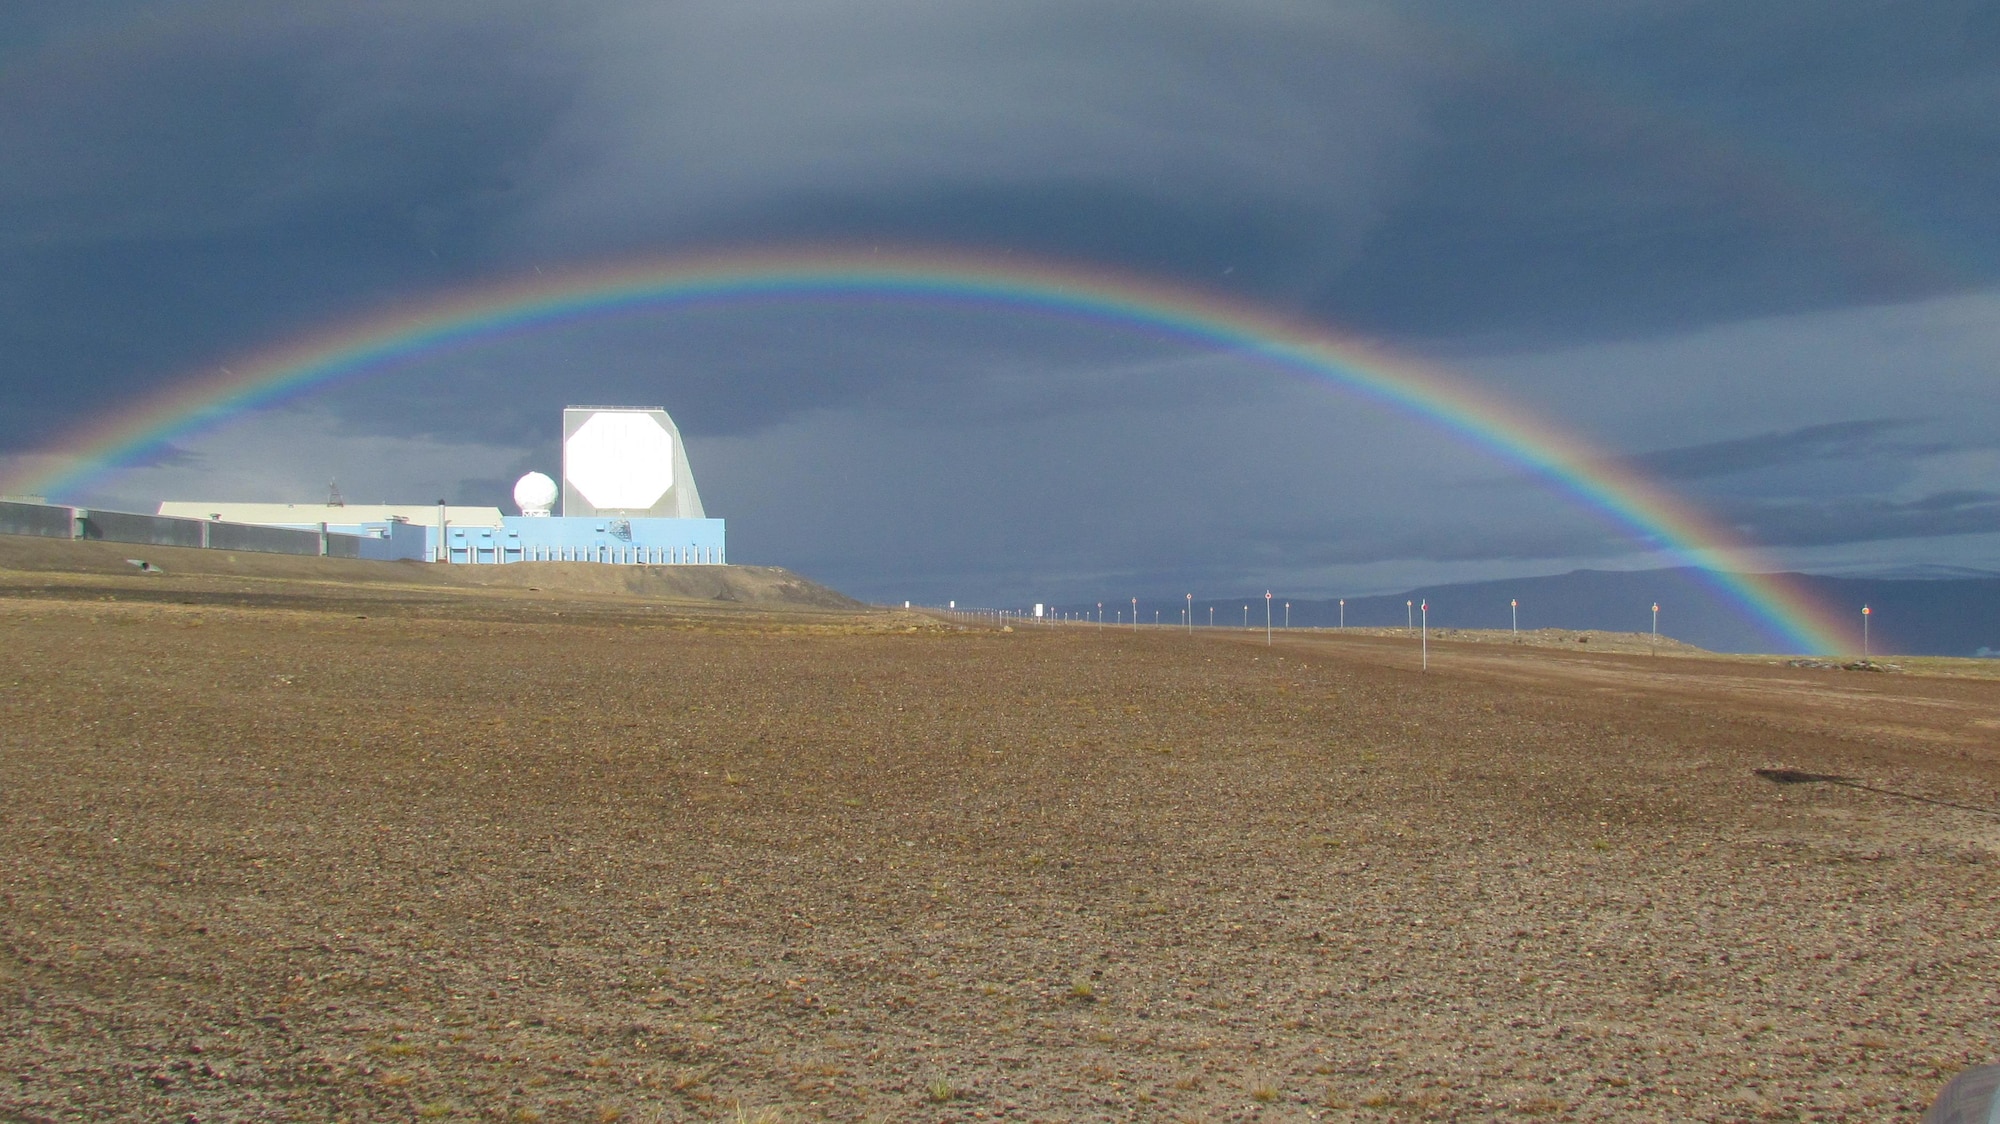 THULE AIR BASE, Greenland – A rainbow arches above the 148-feet-tall, solid-state, phased-array radar system at Ballistic Missile Early Warning Site – I northwest of Thule Air Base, Greenland. The site is operated by the 12th Space Warning Squadron, a geographically separated unit of the 21st Space Wing at Peterson Air Force Base, Colorado. (Courtesy photo)  